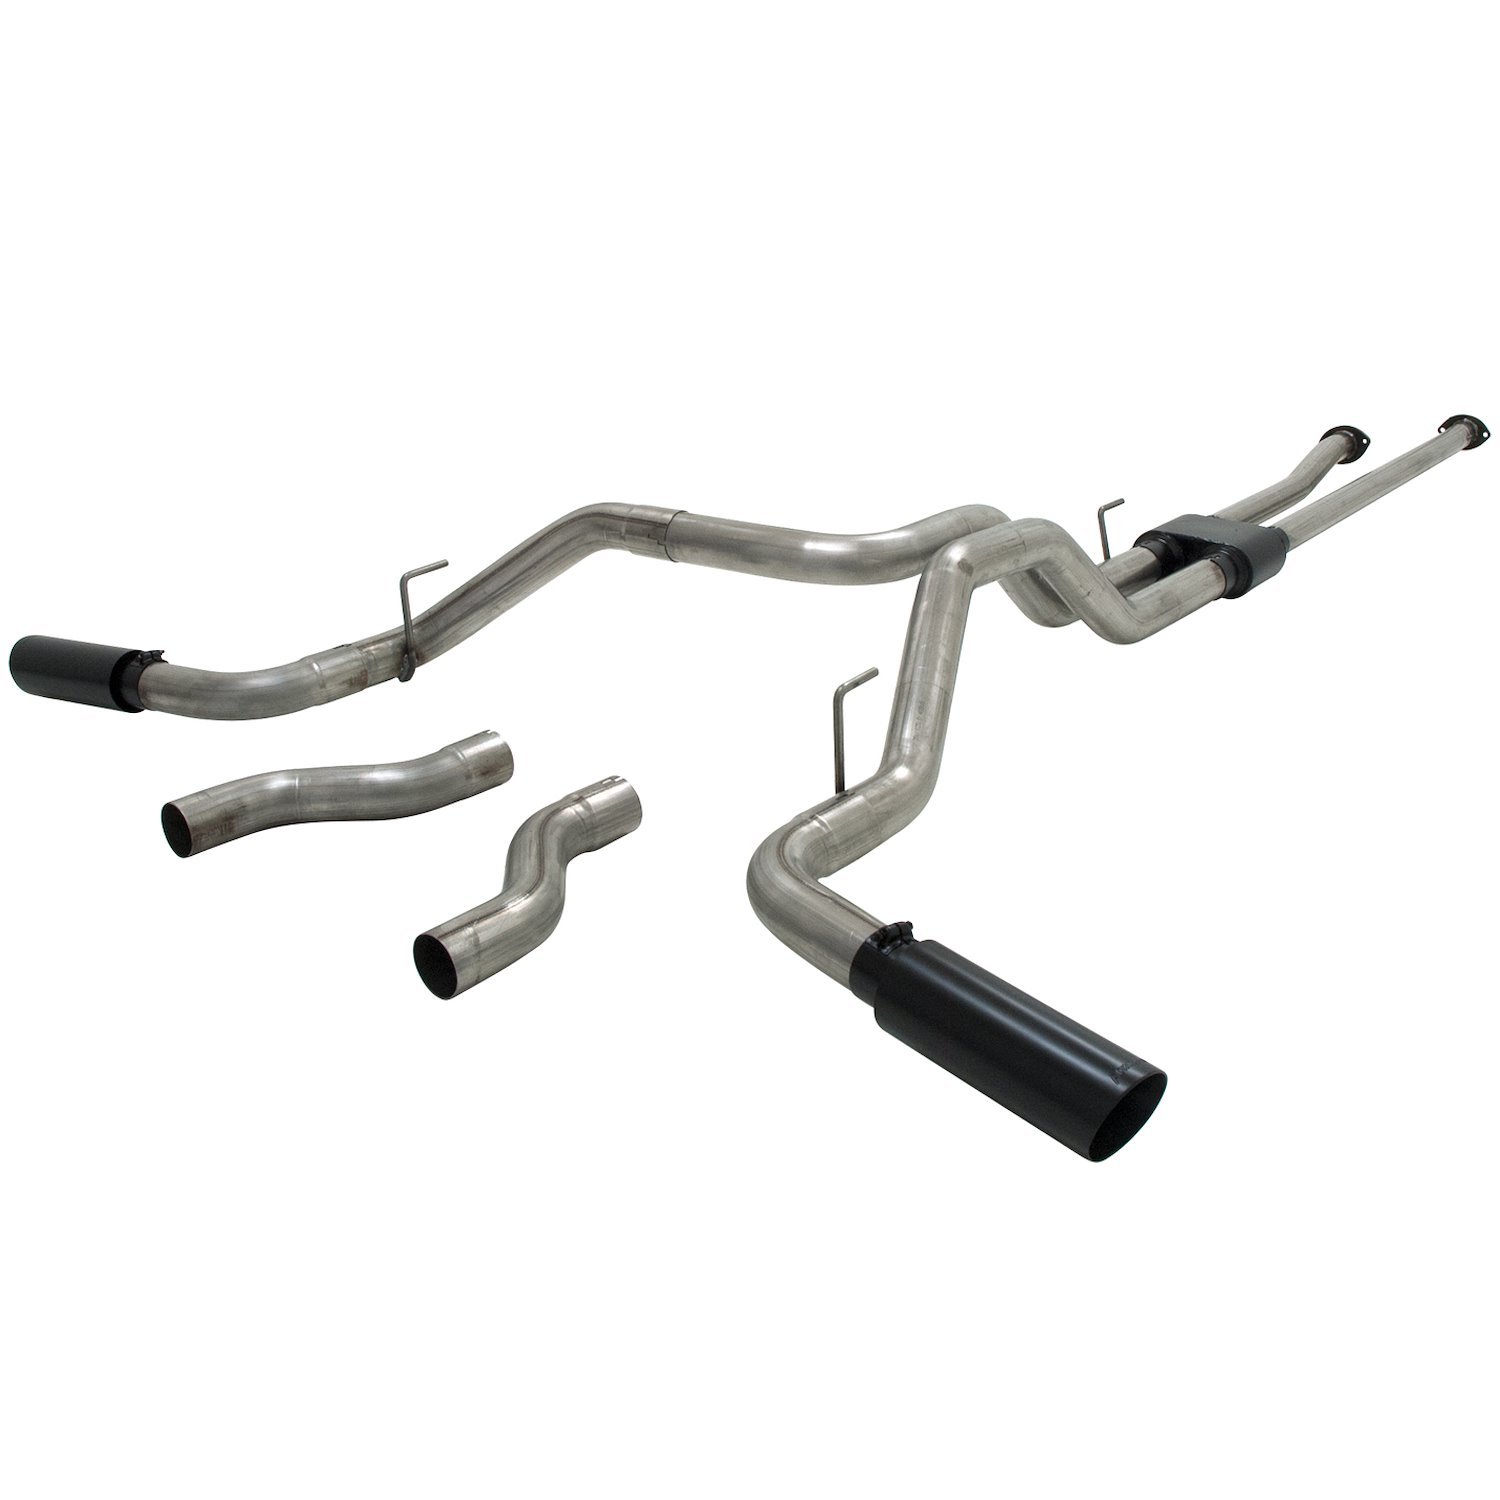 Outlaw Series Cat-Back Exhaust System 2009-2018 Tundra Pickup 4.6L/5.7L